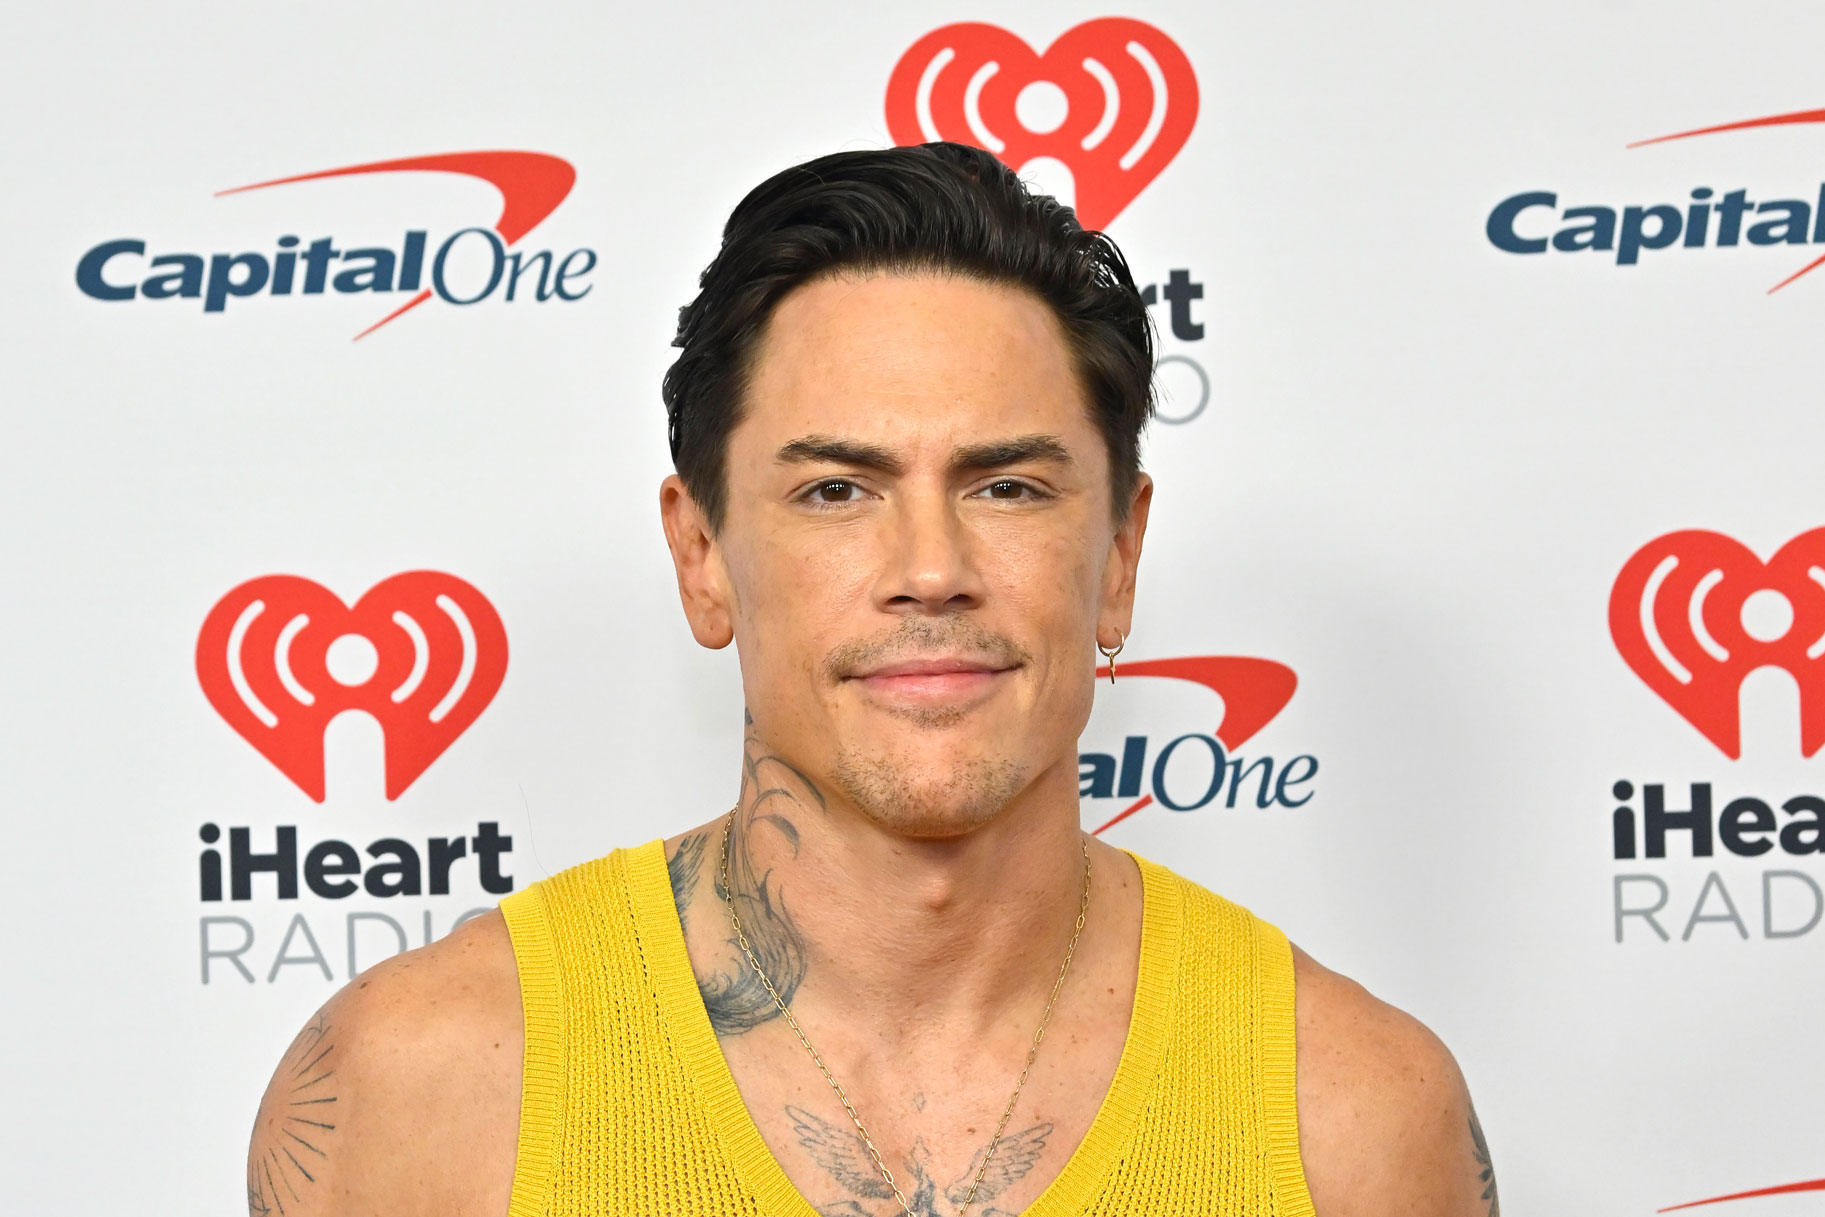 Tom Sandoval Celebrates The End Of A Challenging Year With Festive Karaoke Night